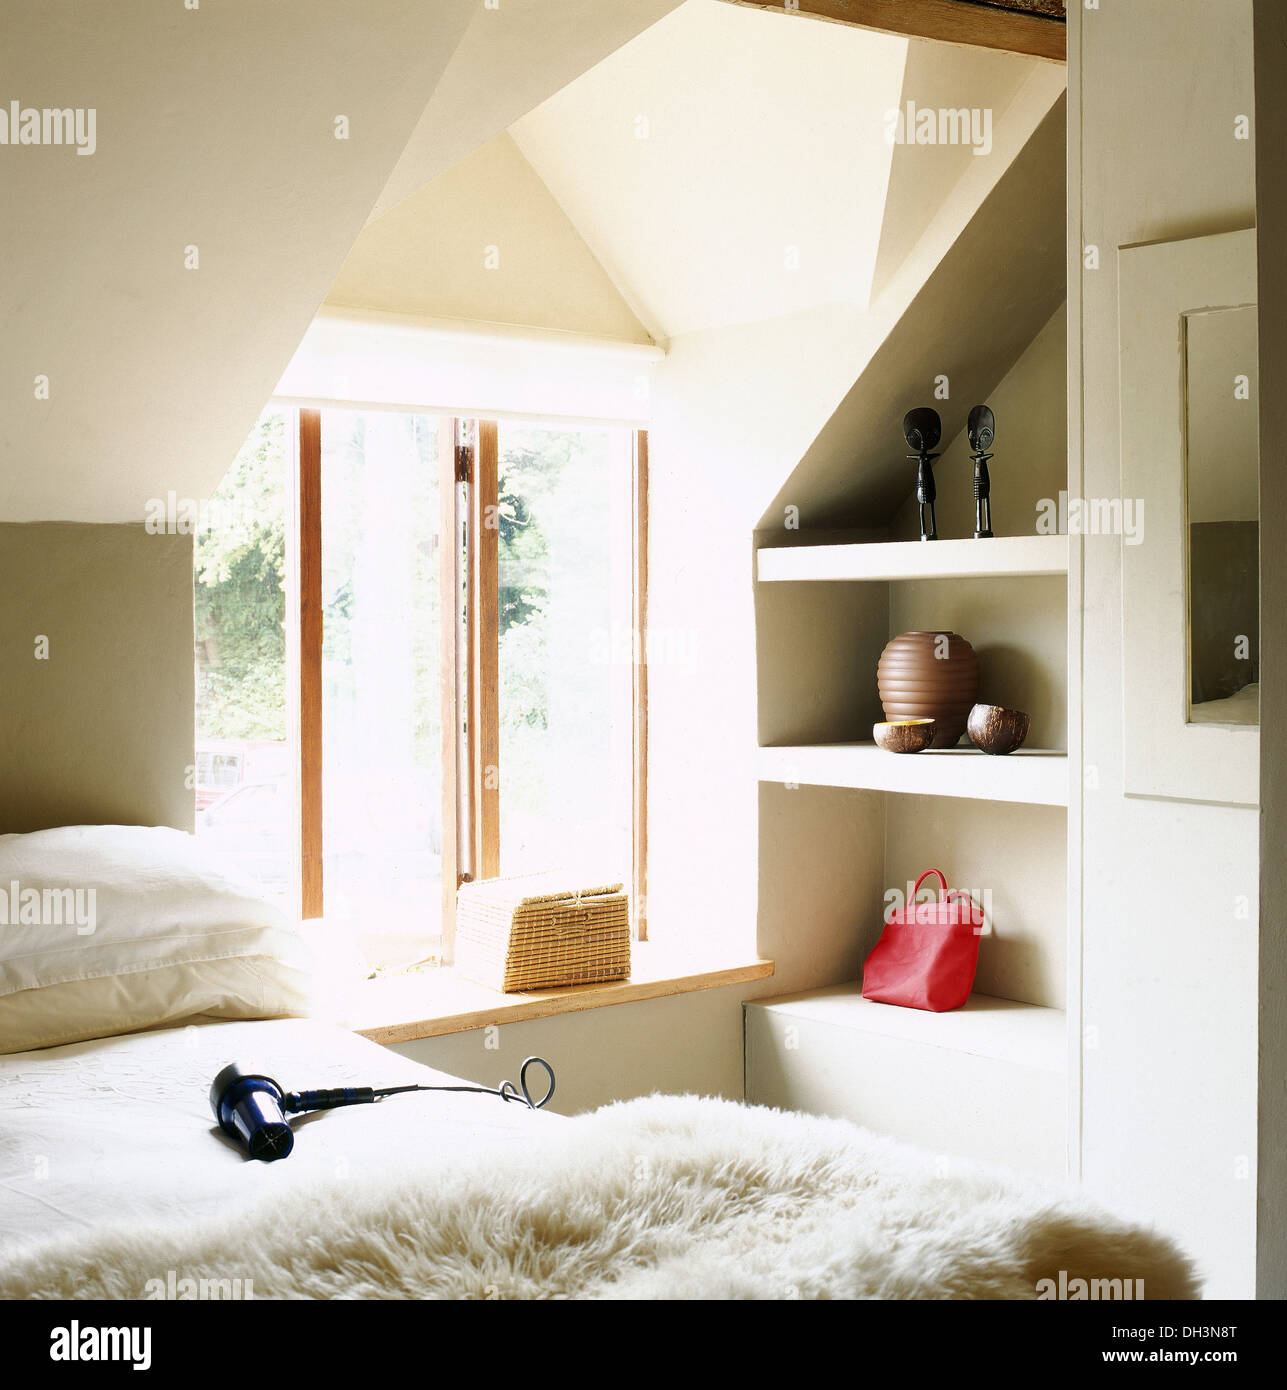 Hairdryer on bed with sheepskin through in modern, loft style bedroom with open alcove shelving Stock Photo